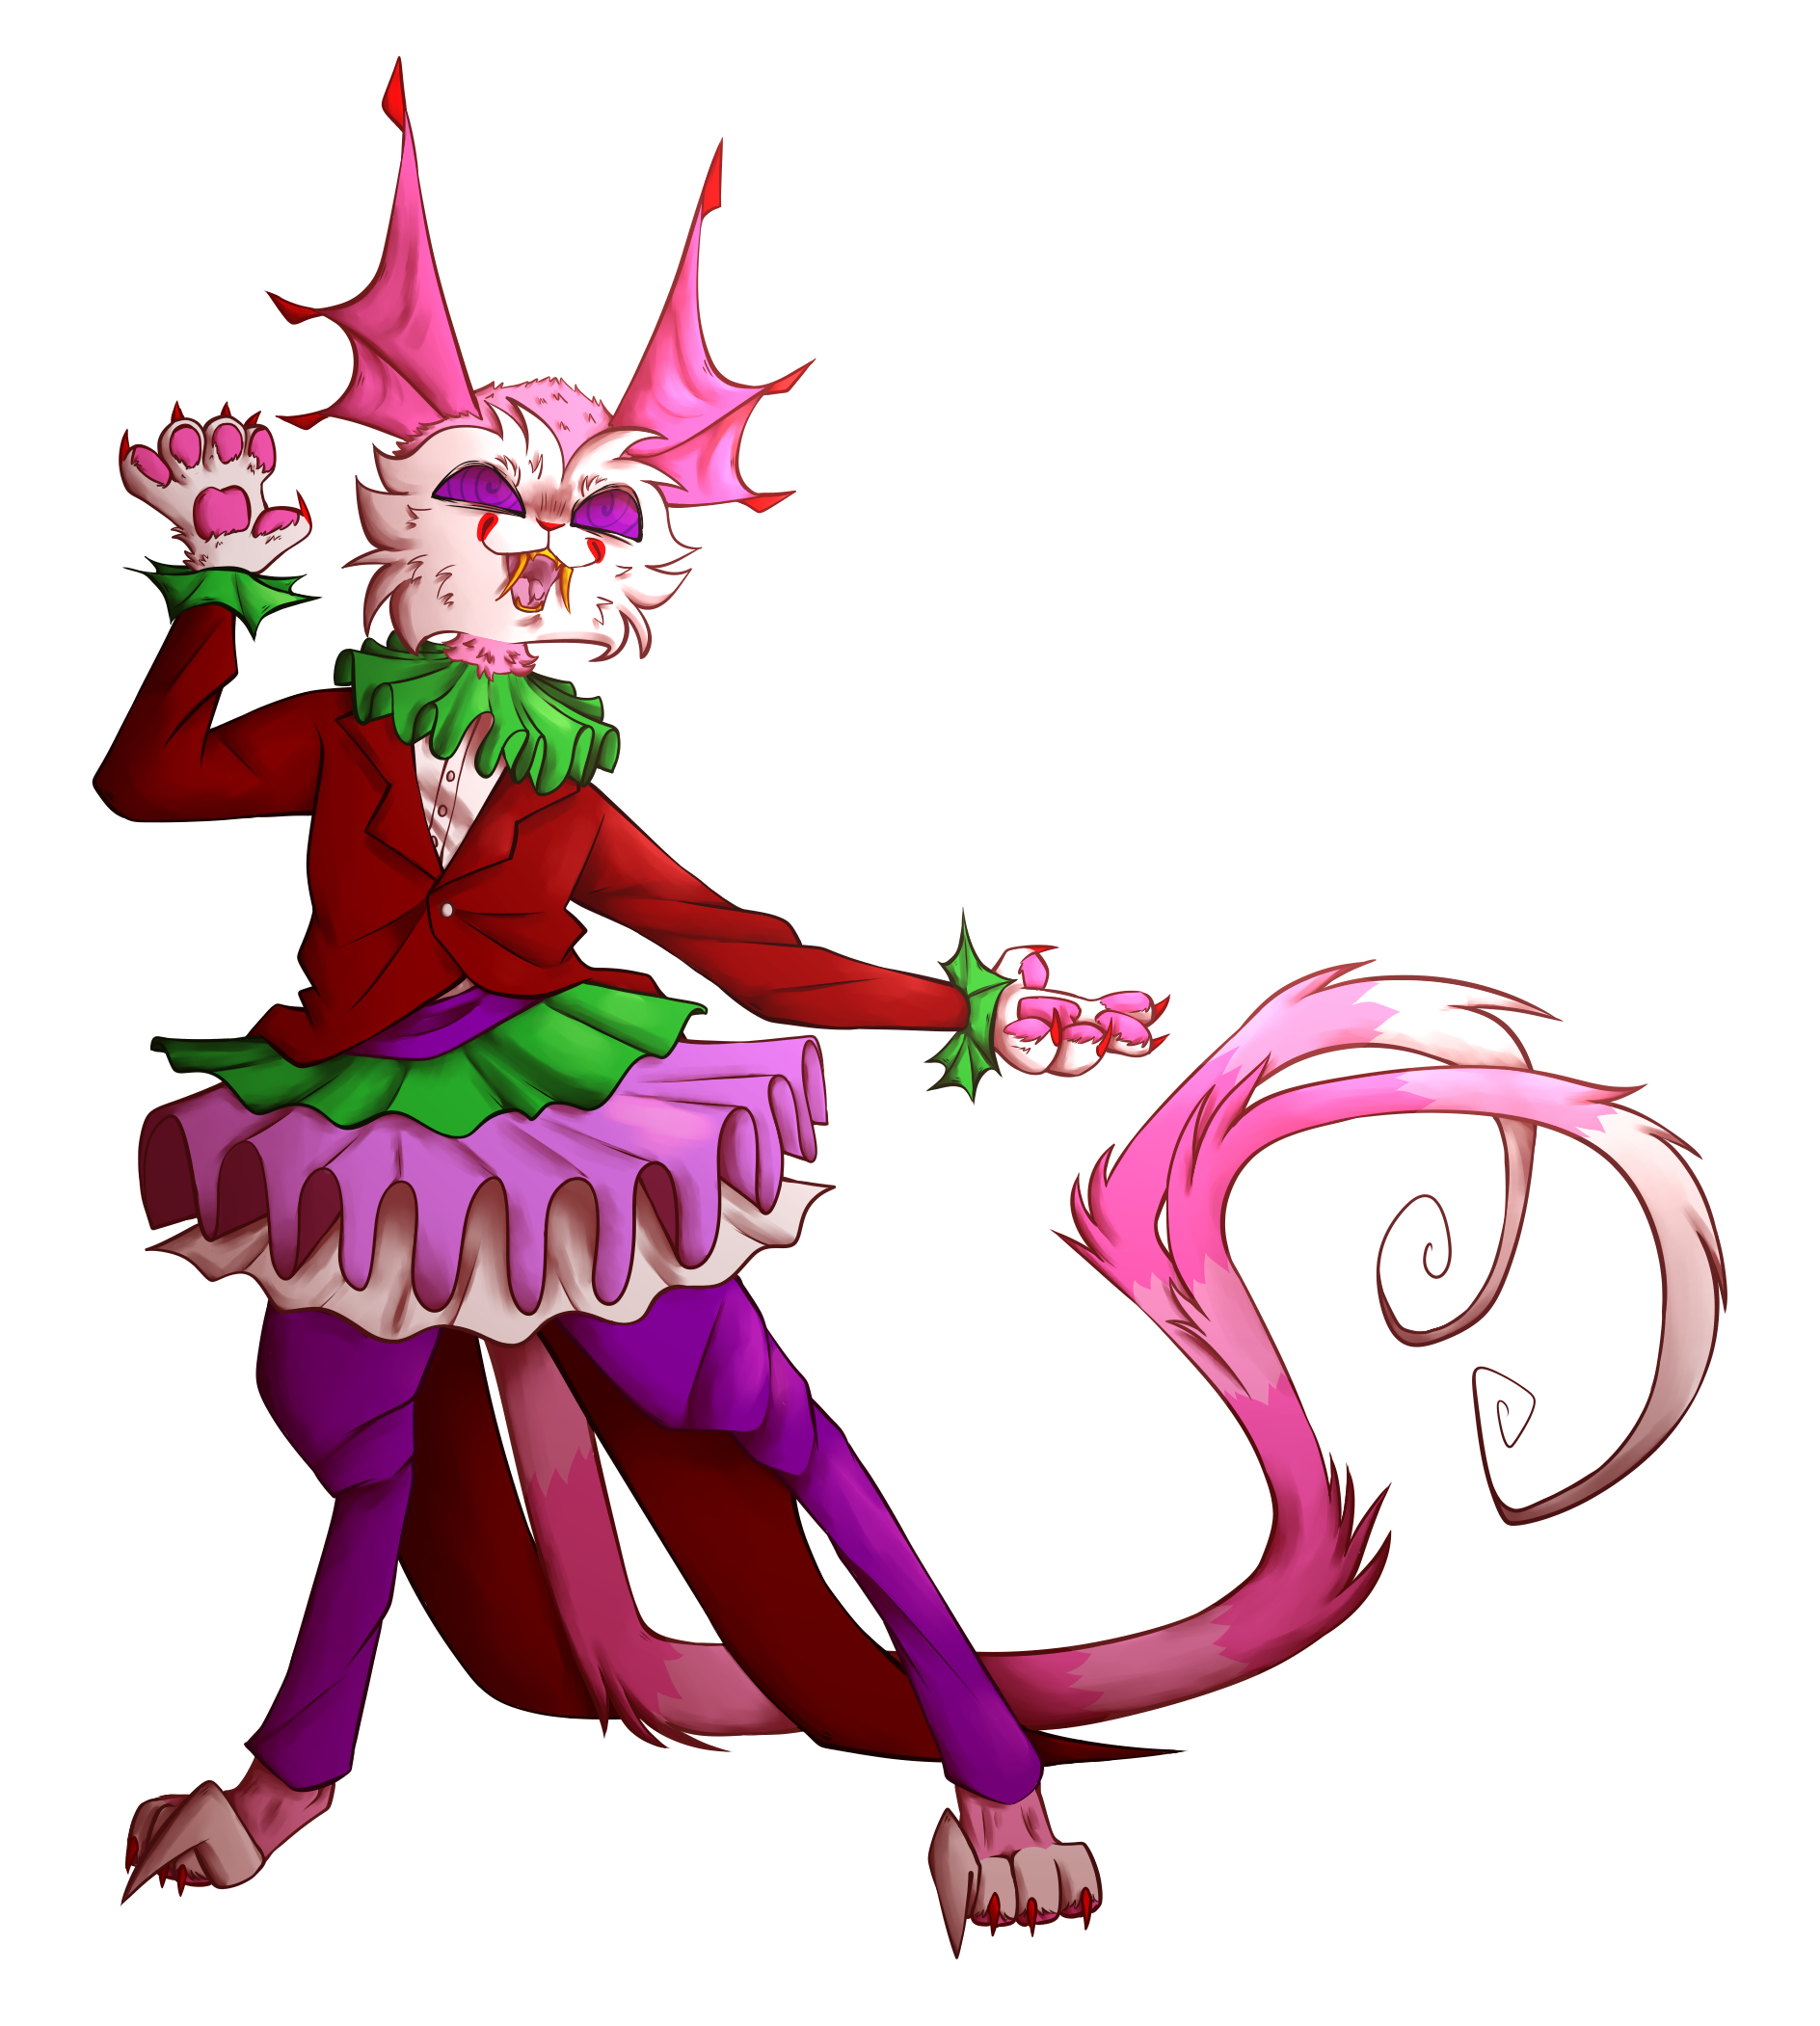 a transparent digital drawing of a pink creature with webbed ears, spiral eyes and long fangs. it is standing on two legs and its arms are stretched out, with the left one near the side of its face and the other reaching out. it is wearing a tailcoat and a tutu.